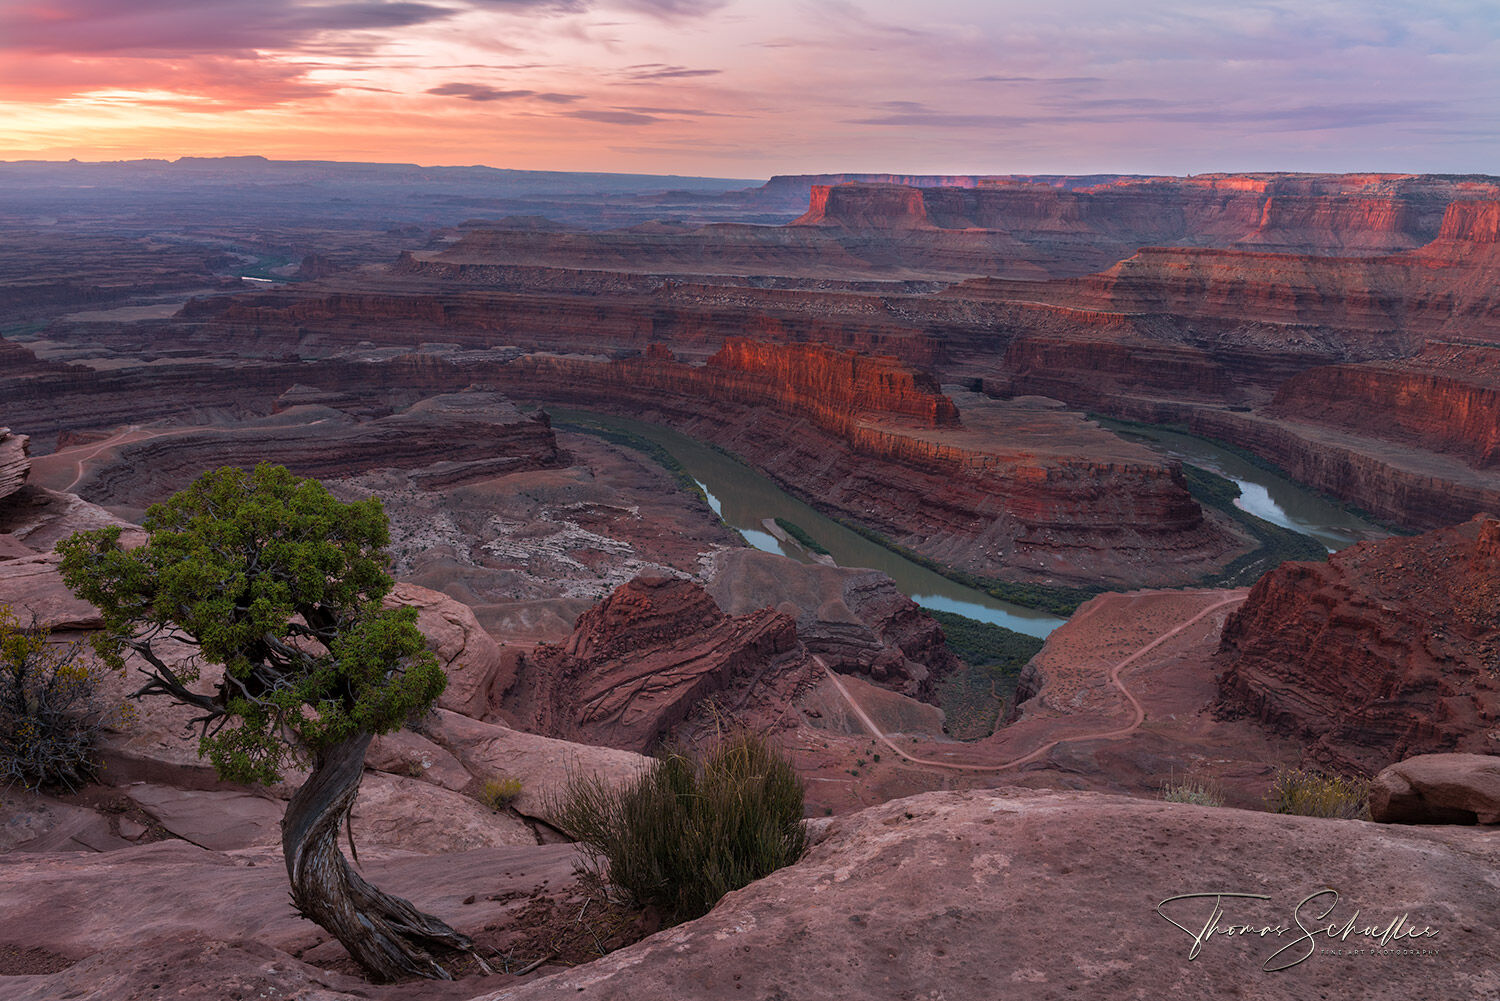 One of the most beautiful rosy sunrise events photographed overlooking the Canyon of Dead Horse Point | Limited Edition Utah Fine Art Photography prints 